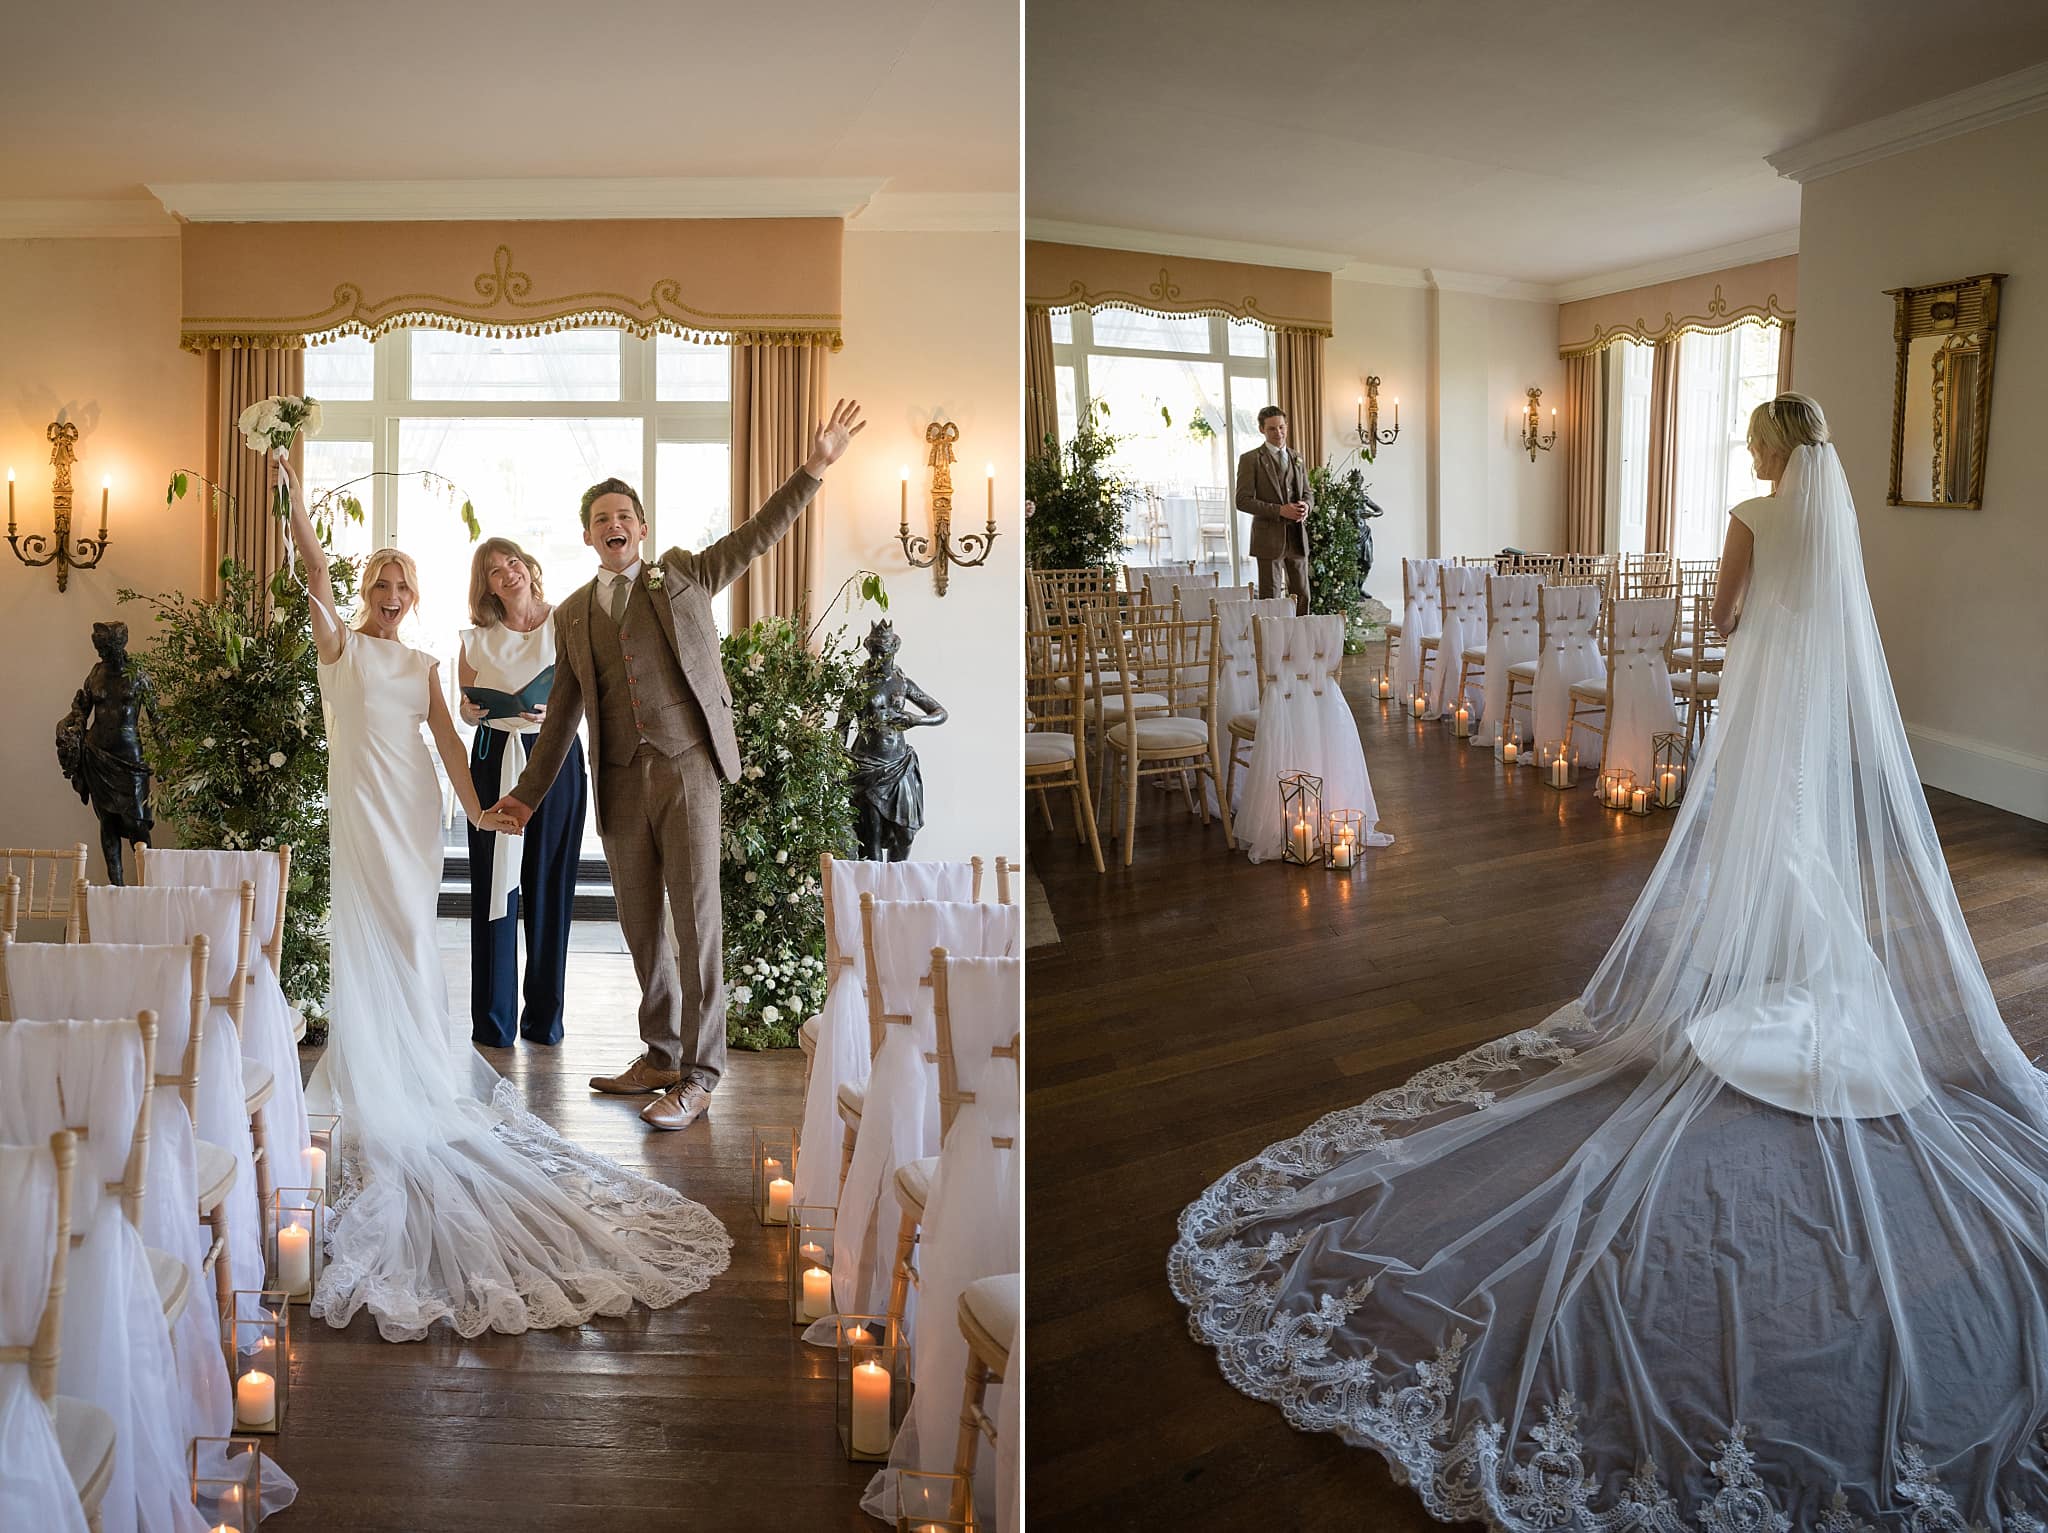 Bride and groom in the ceremony room at Sutton Bonington Hall